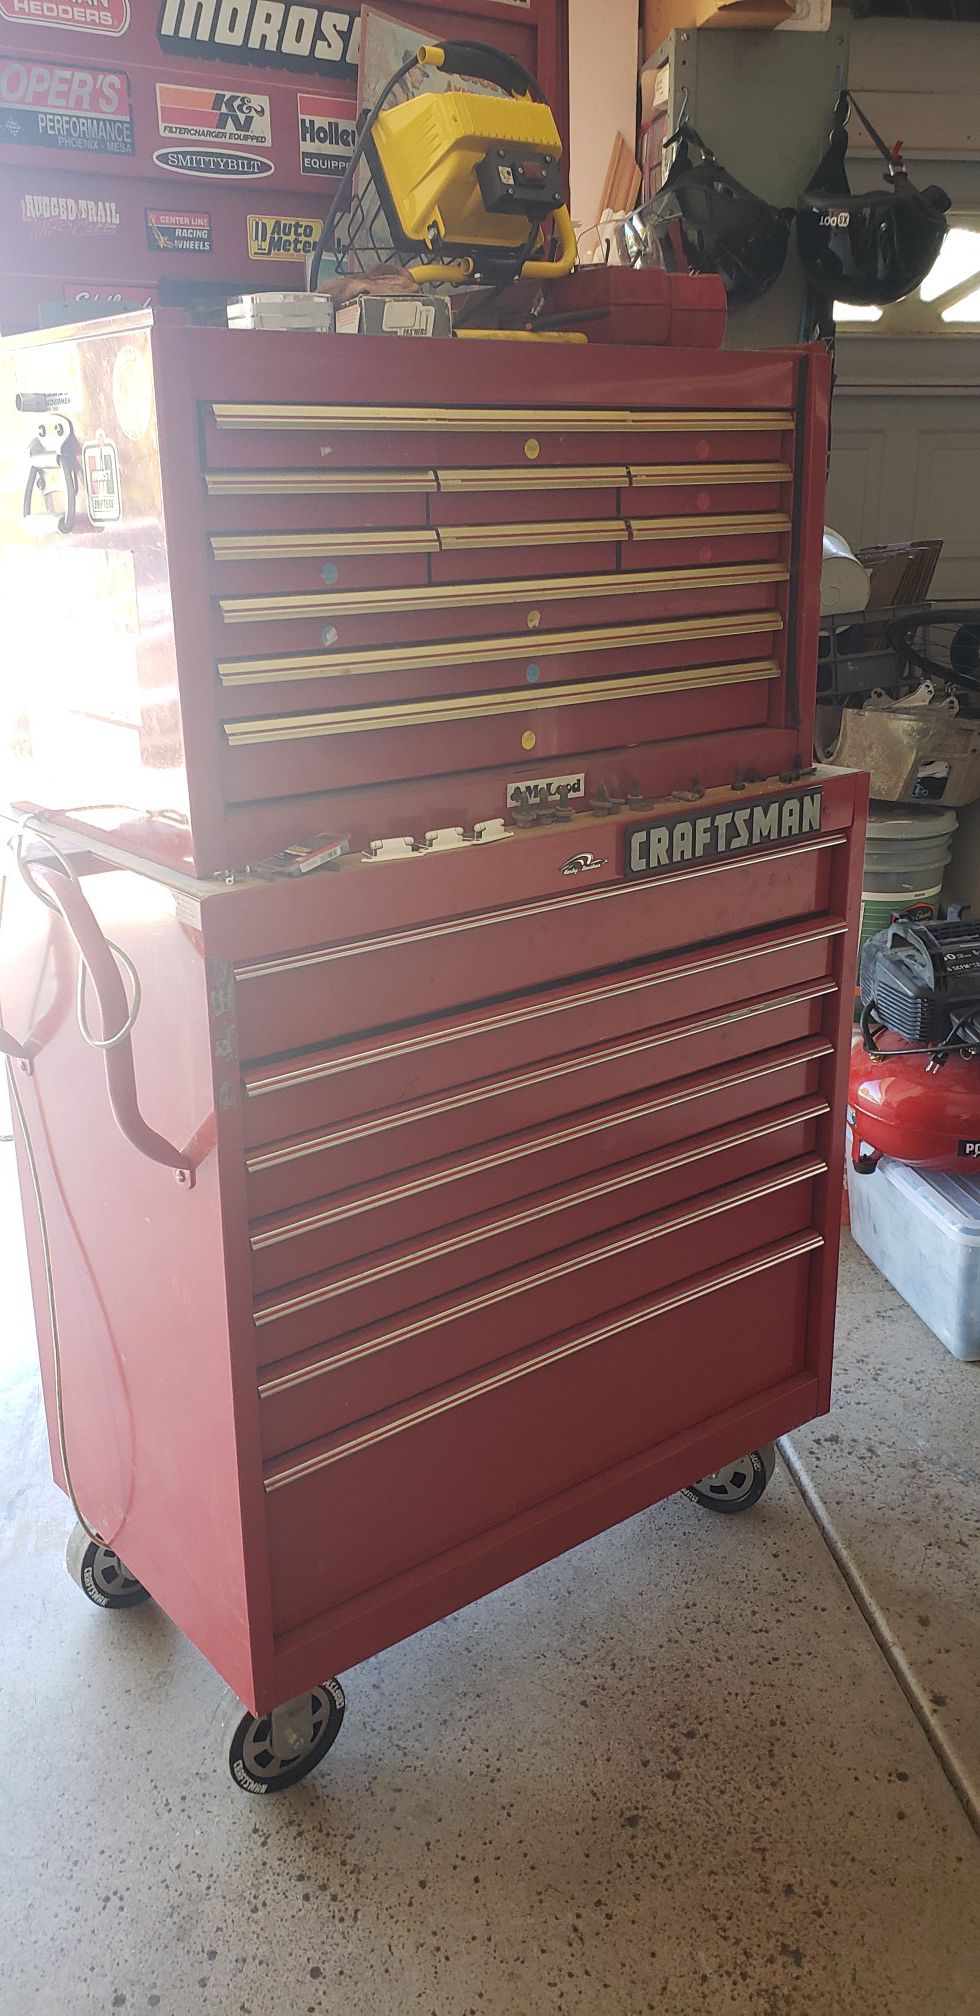 Craftsman pro-series industrial tool boxes from the 90's